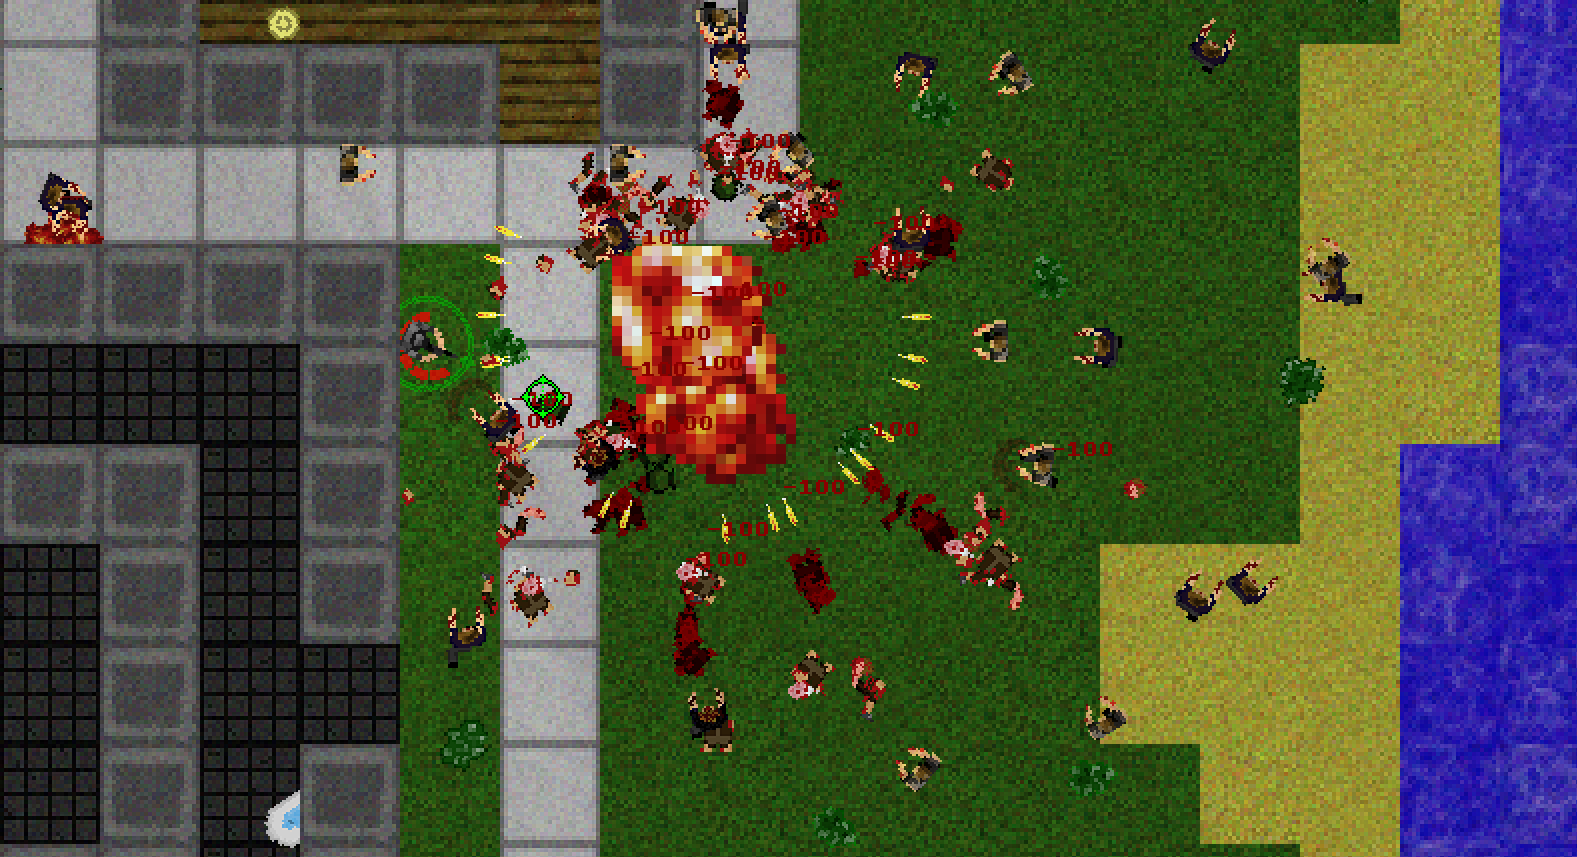 More Top Down Zombie Killing Chaos! image - Over 9000 Zombies! - Indie DB